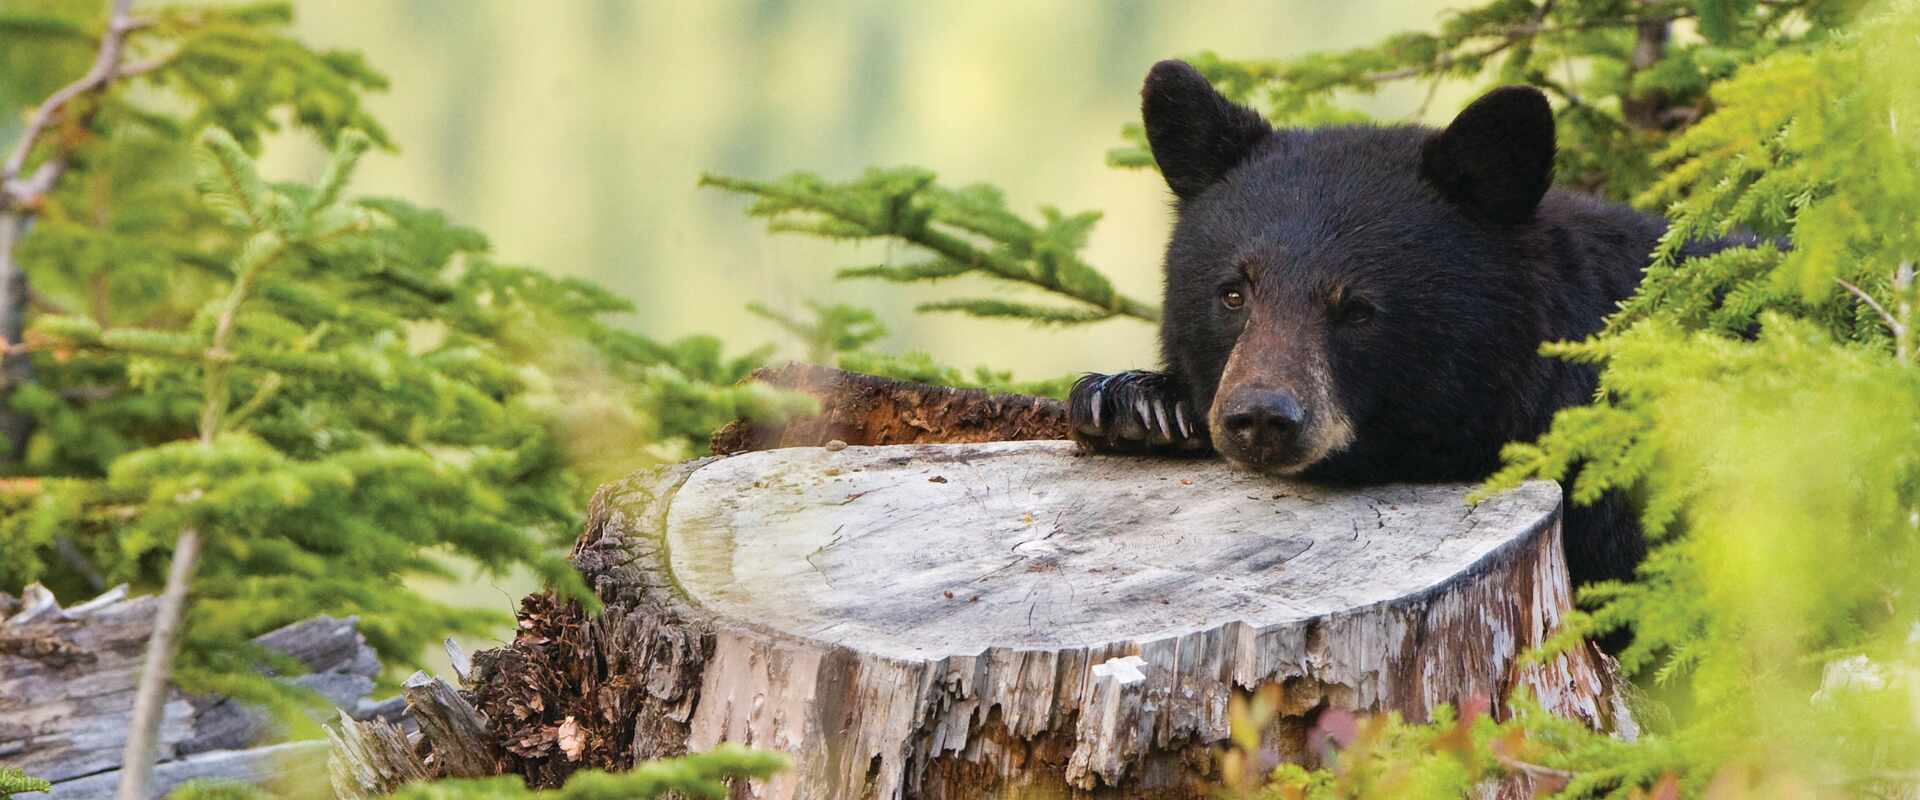 Image of Black bear in the wild forest, Canada